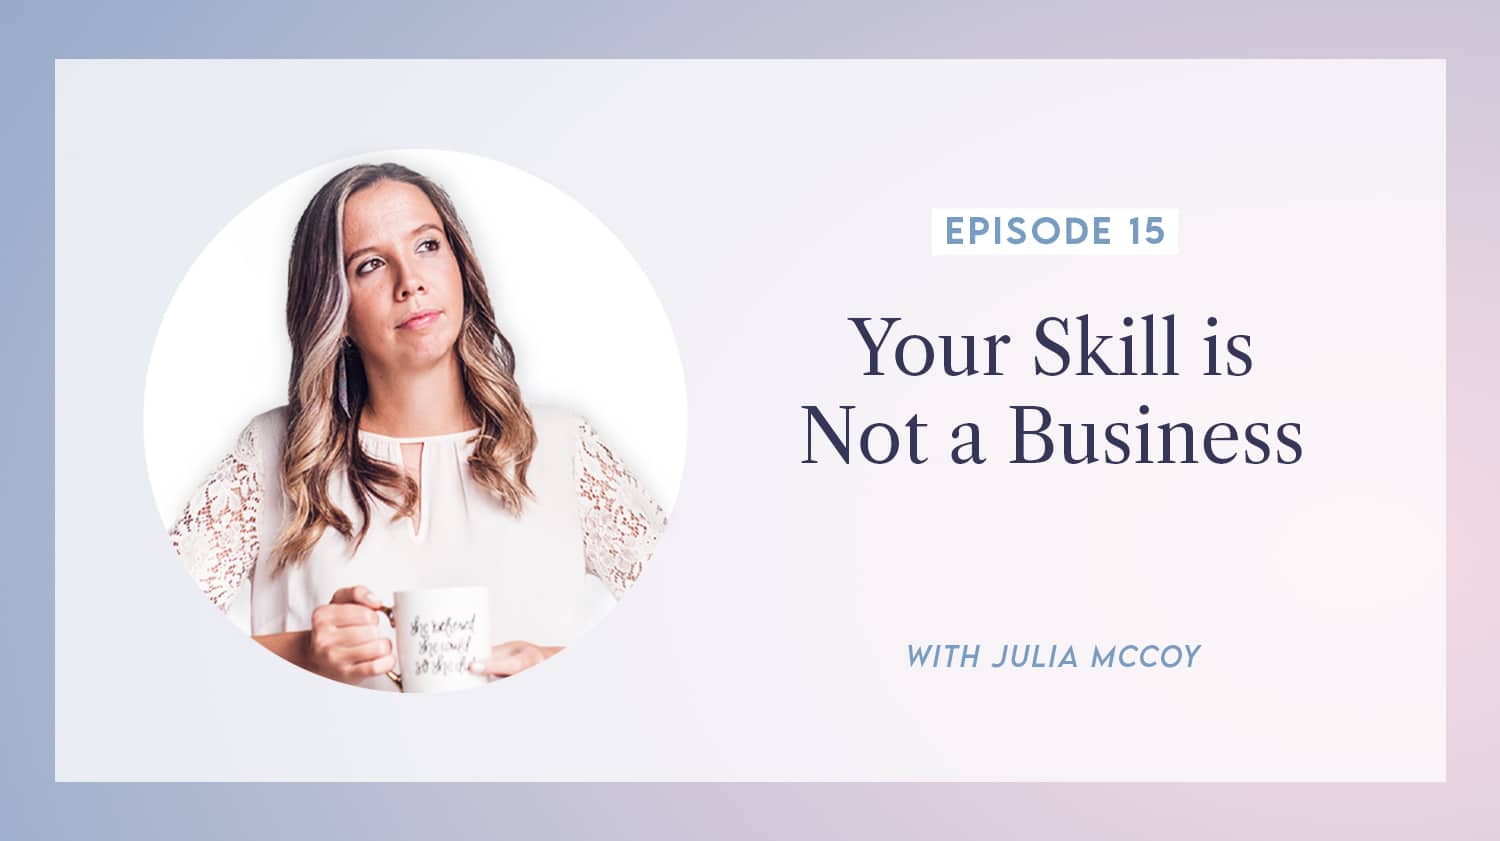 content transformation podcast with julia mccoy episode 15 your skill is not a business